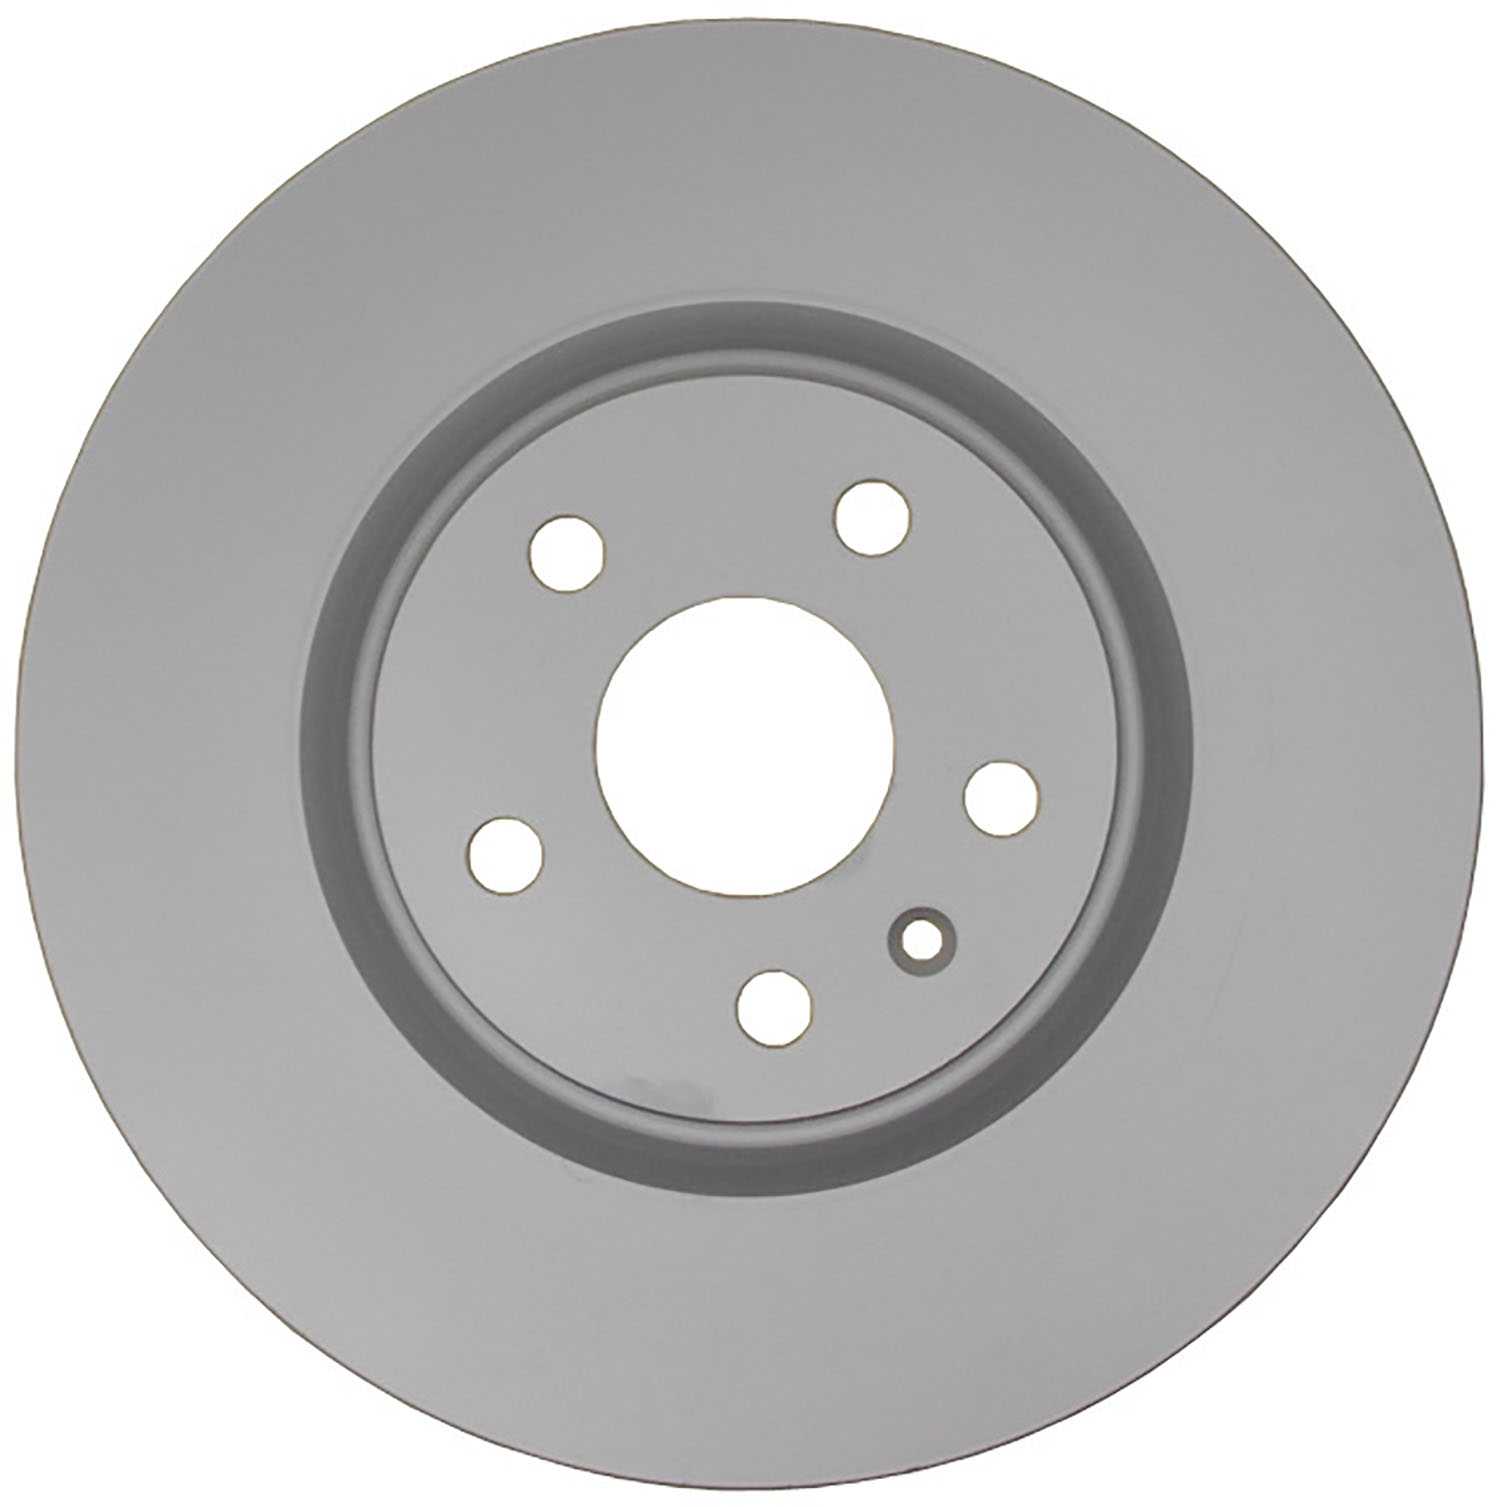 ACDELCO SPECIALTY - Police Disc Brake Rotor - DCE 18A2652PV